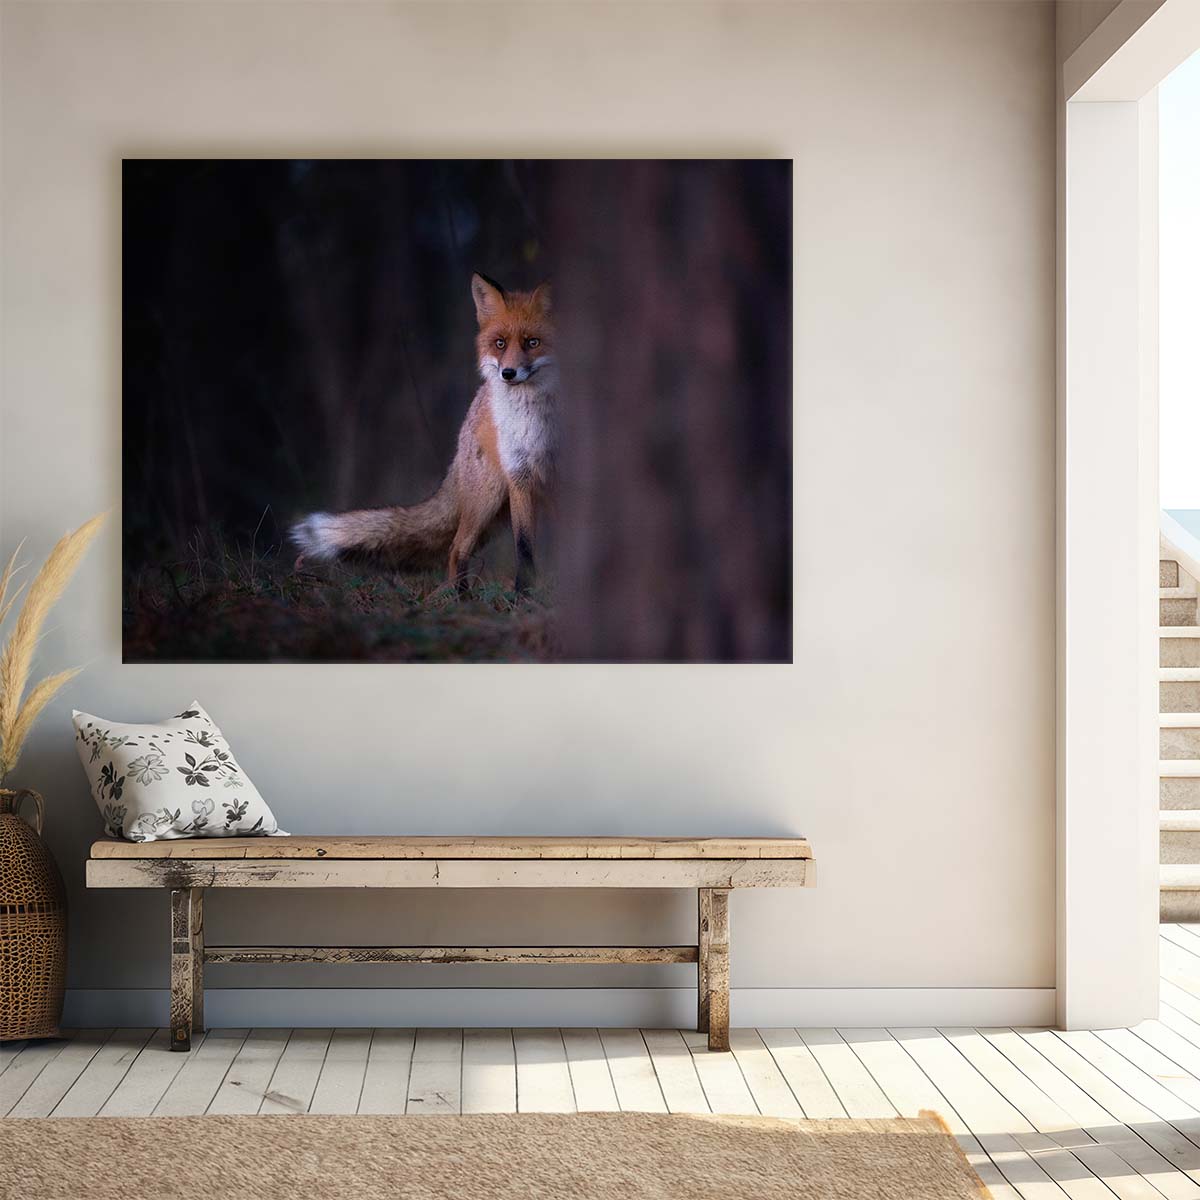 Enigmatic Red Fox Night Forest Wildlife Wall Art by Luxuriance Designs. Made in USA.